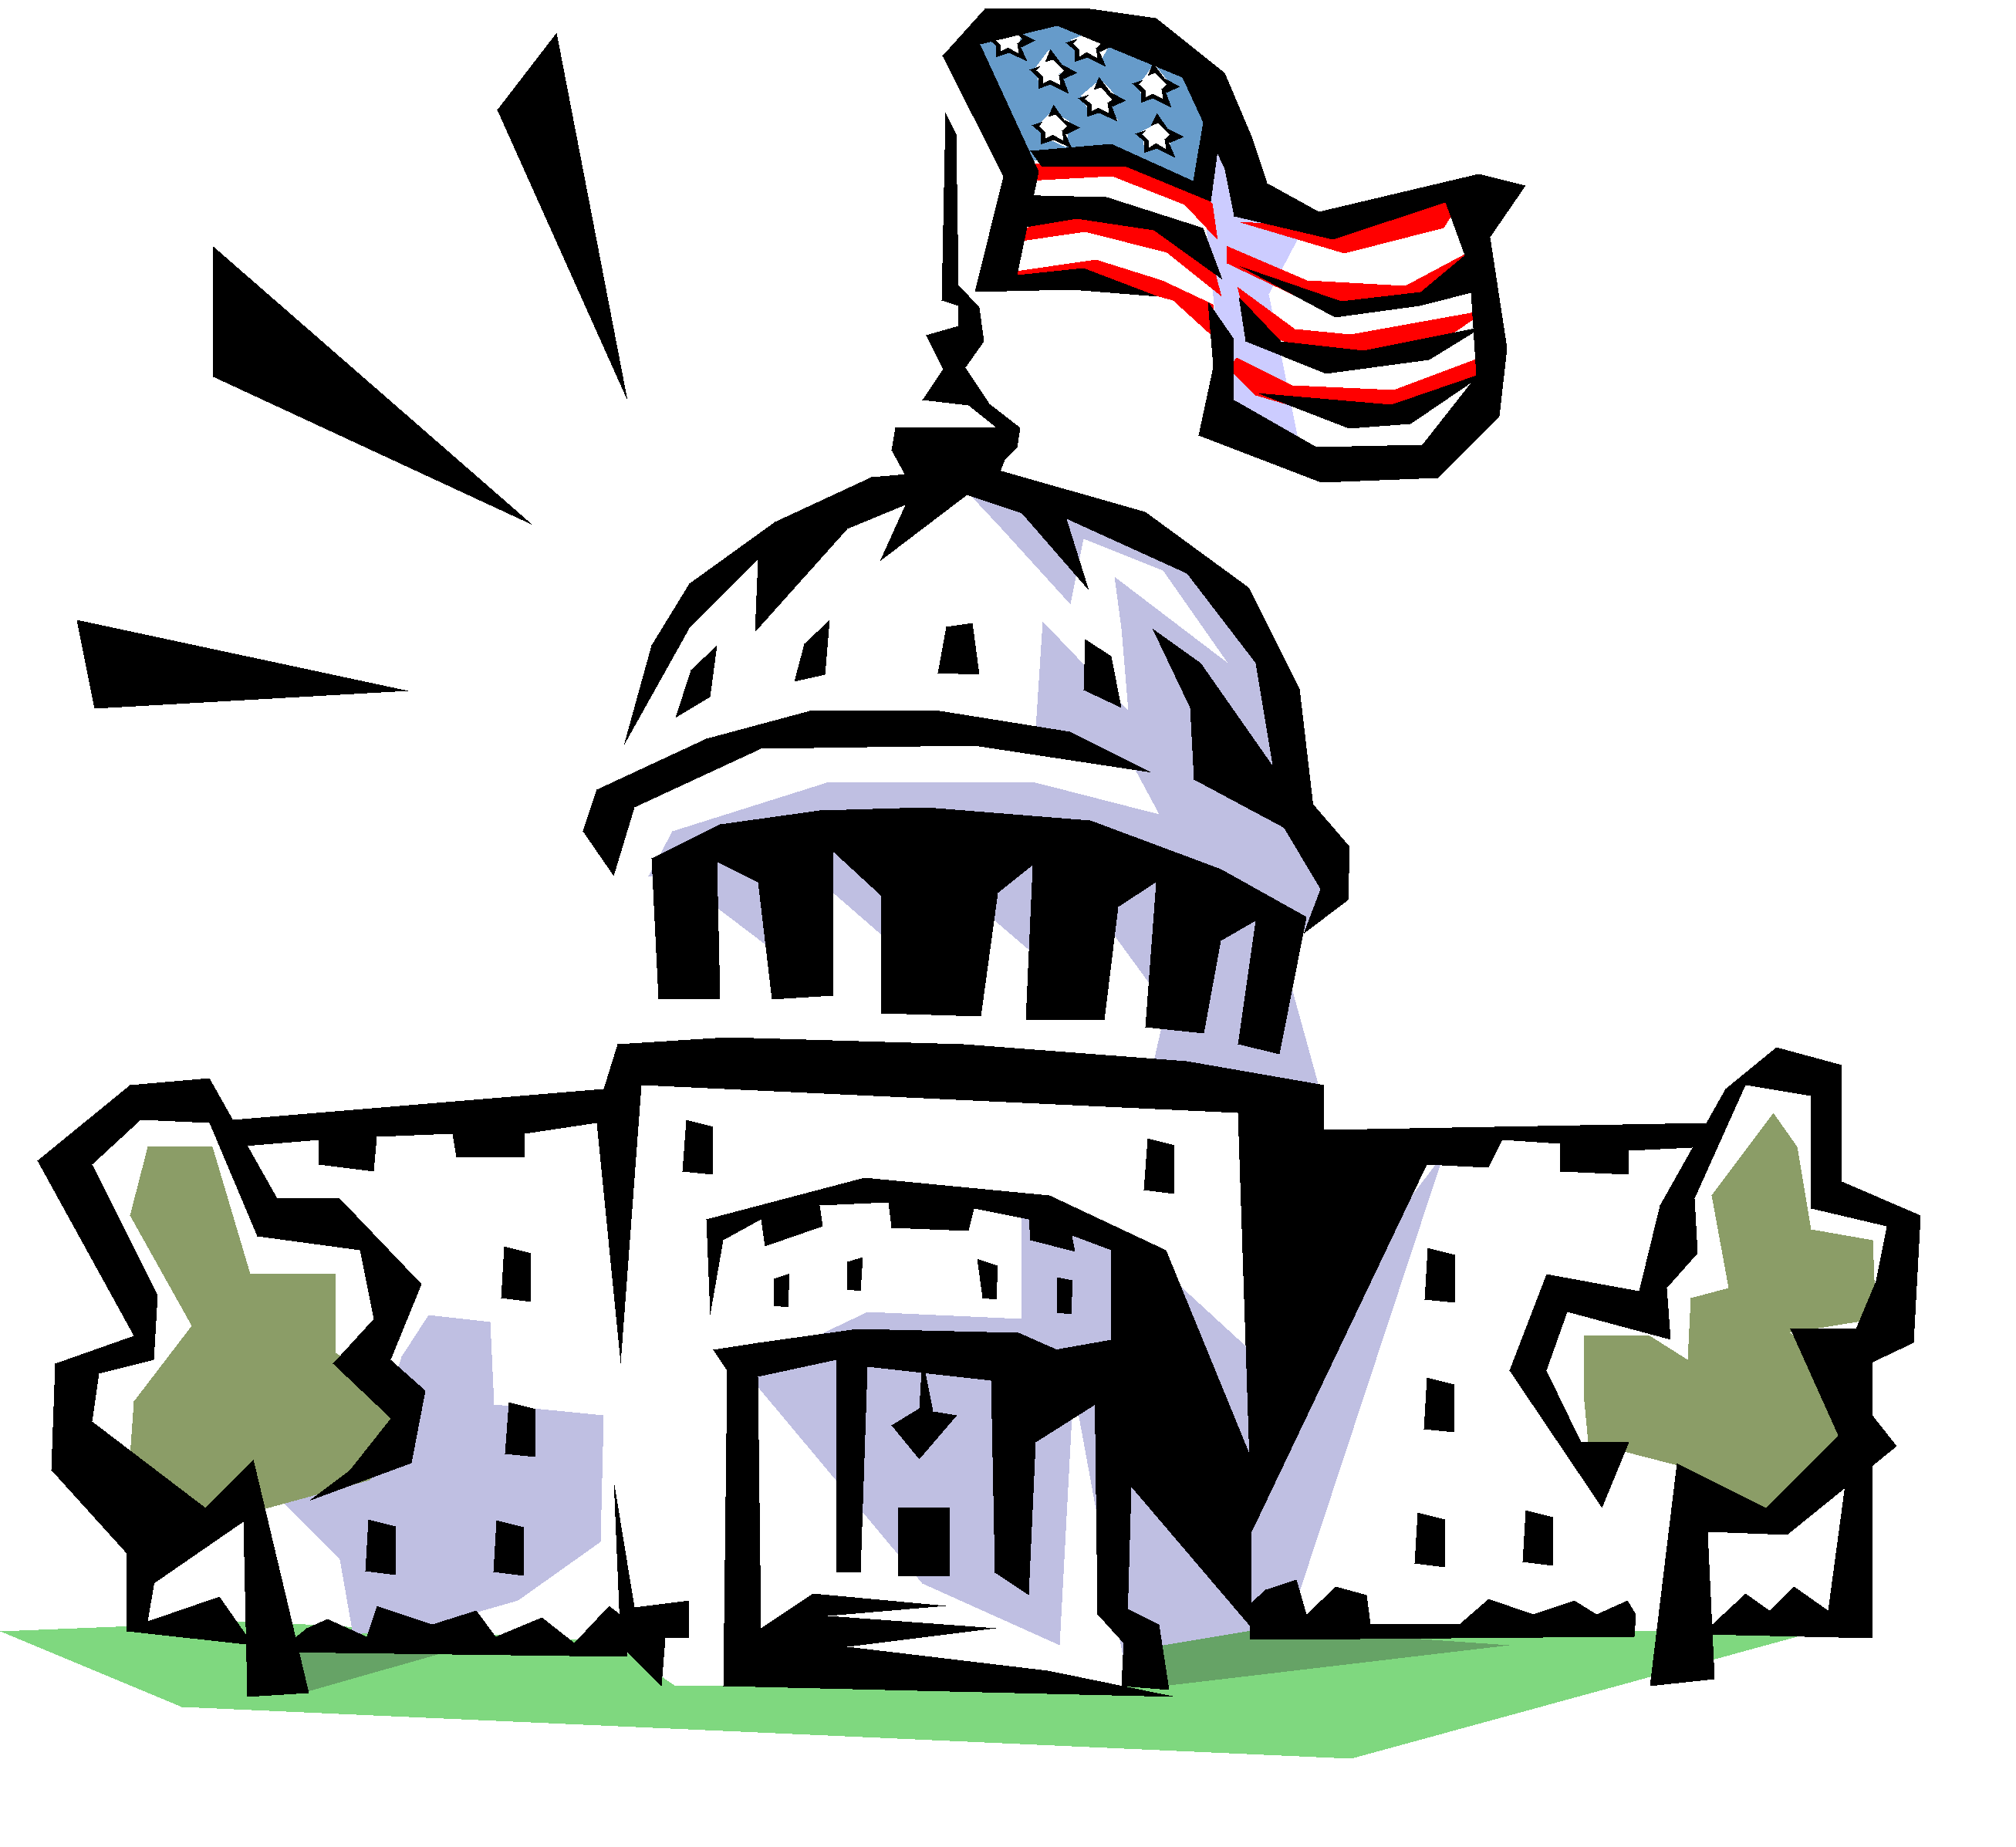 house of representatives and senate clipart drawing - Clipground